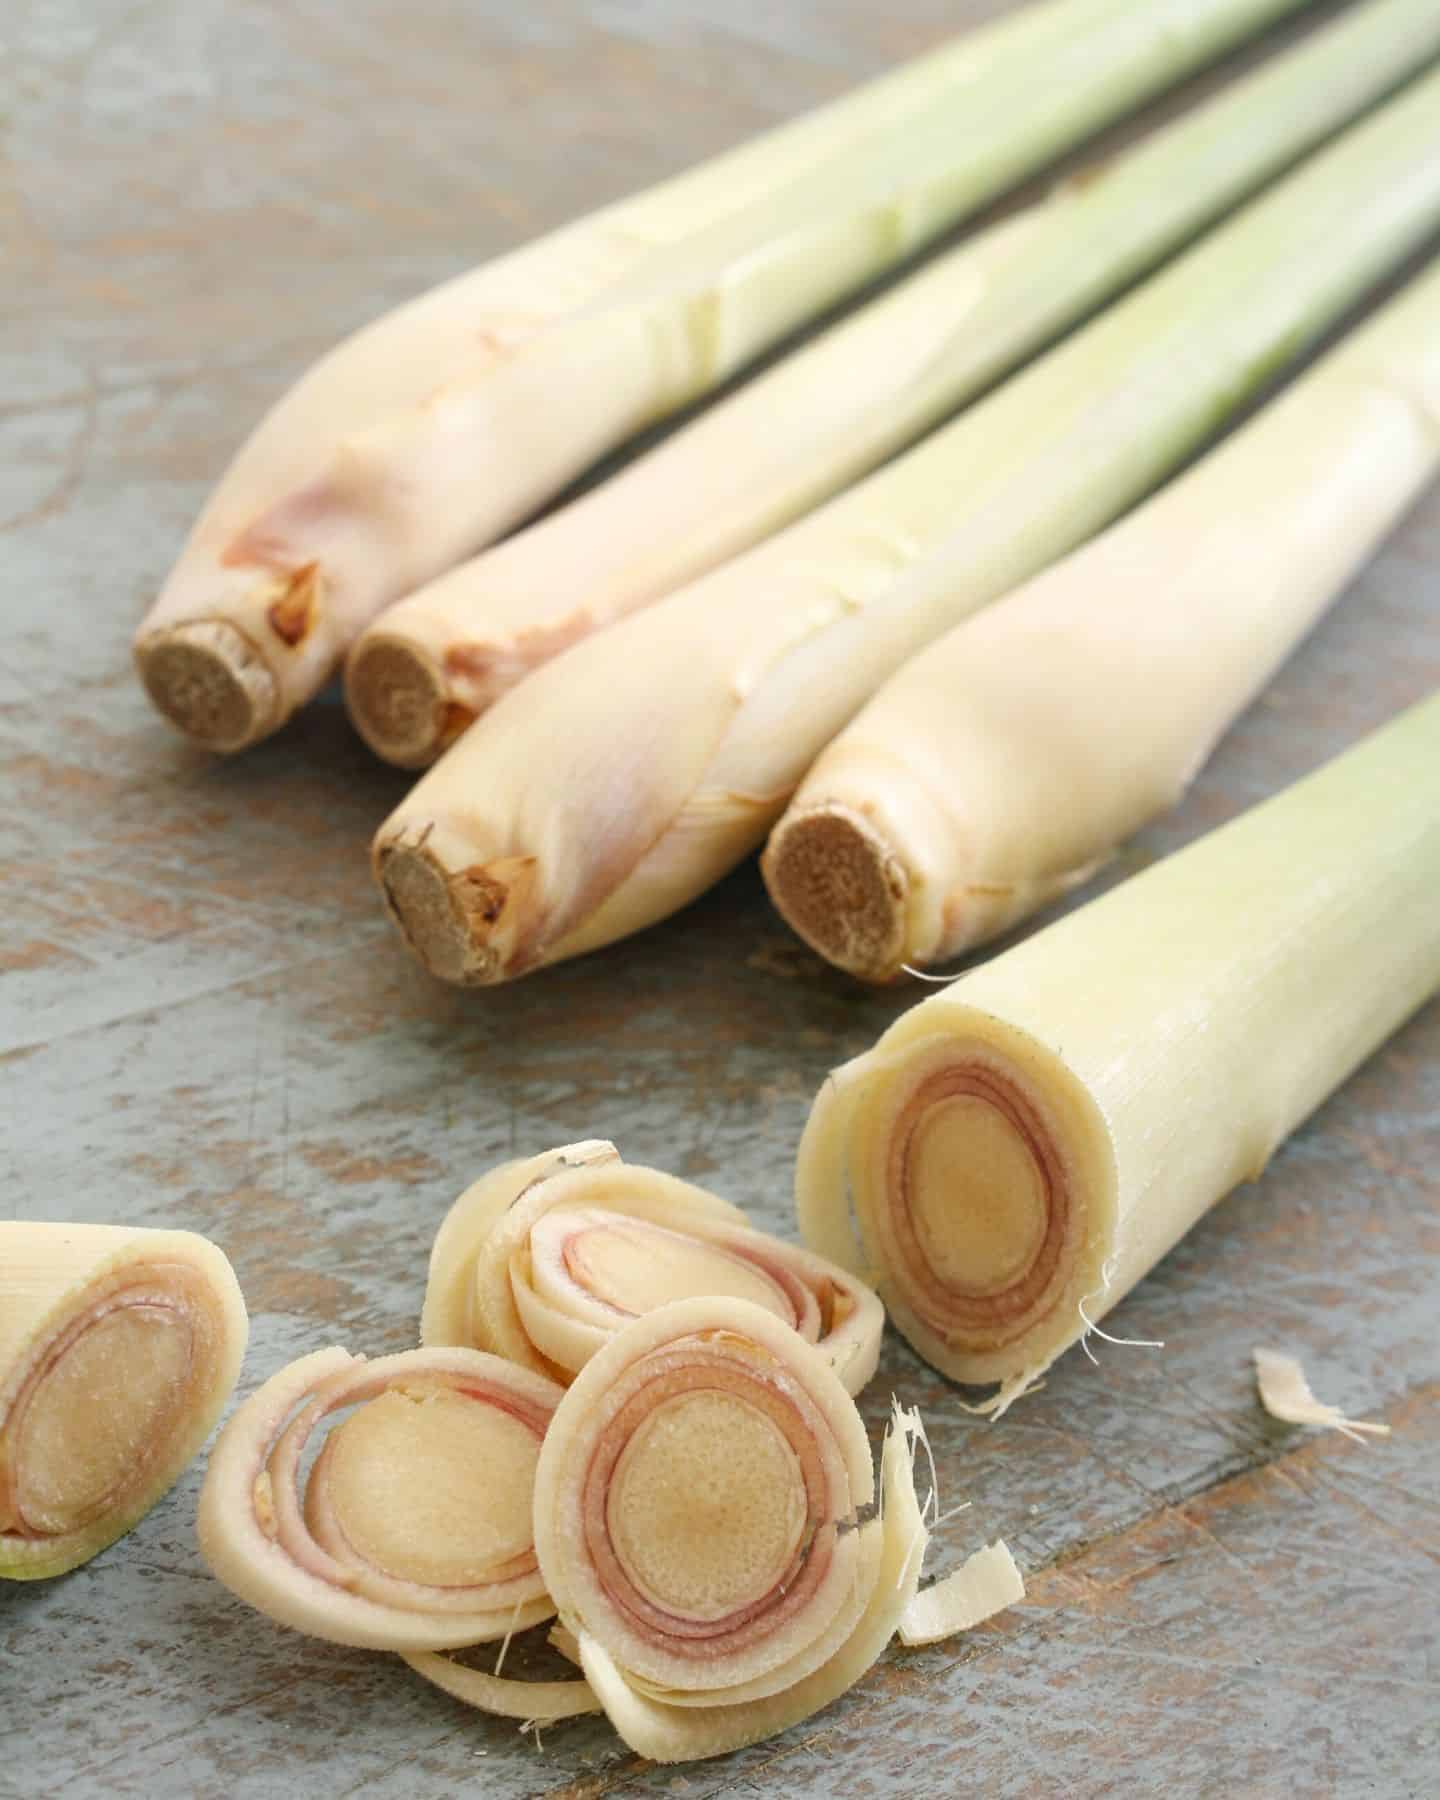 5 sticks of lemongrass with one of them chopped up into a few thin slices